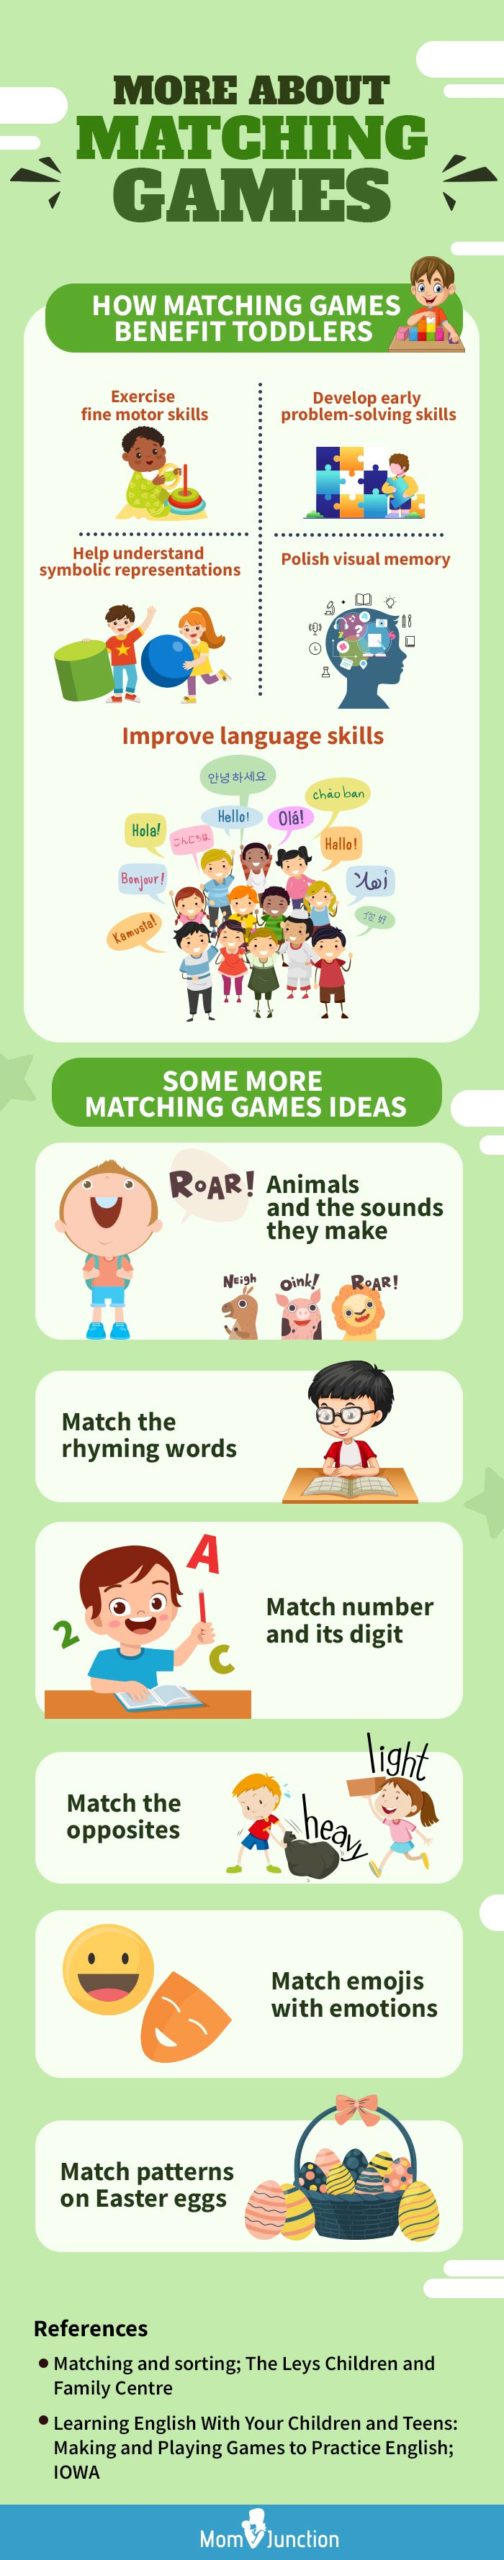 more about matching games for toddlers (infographic)